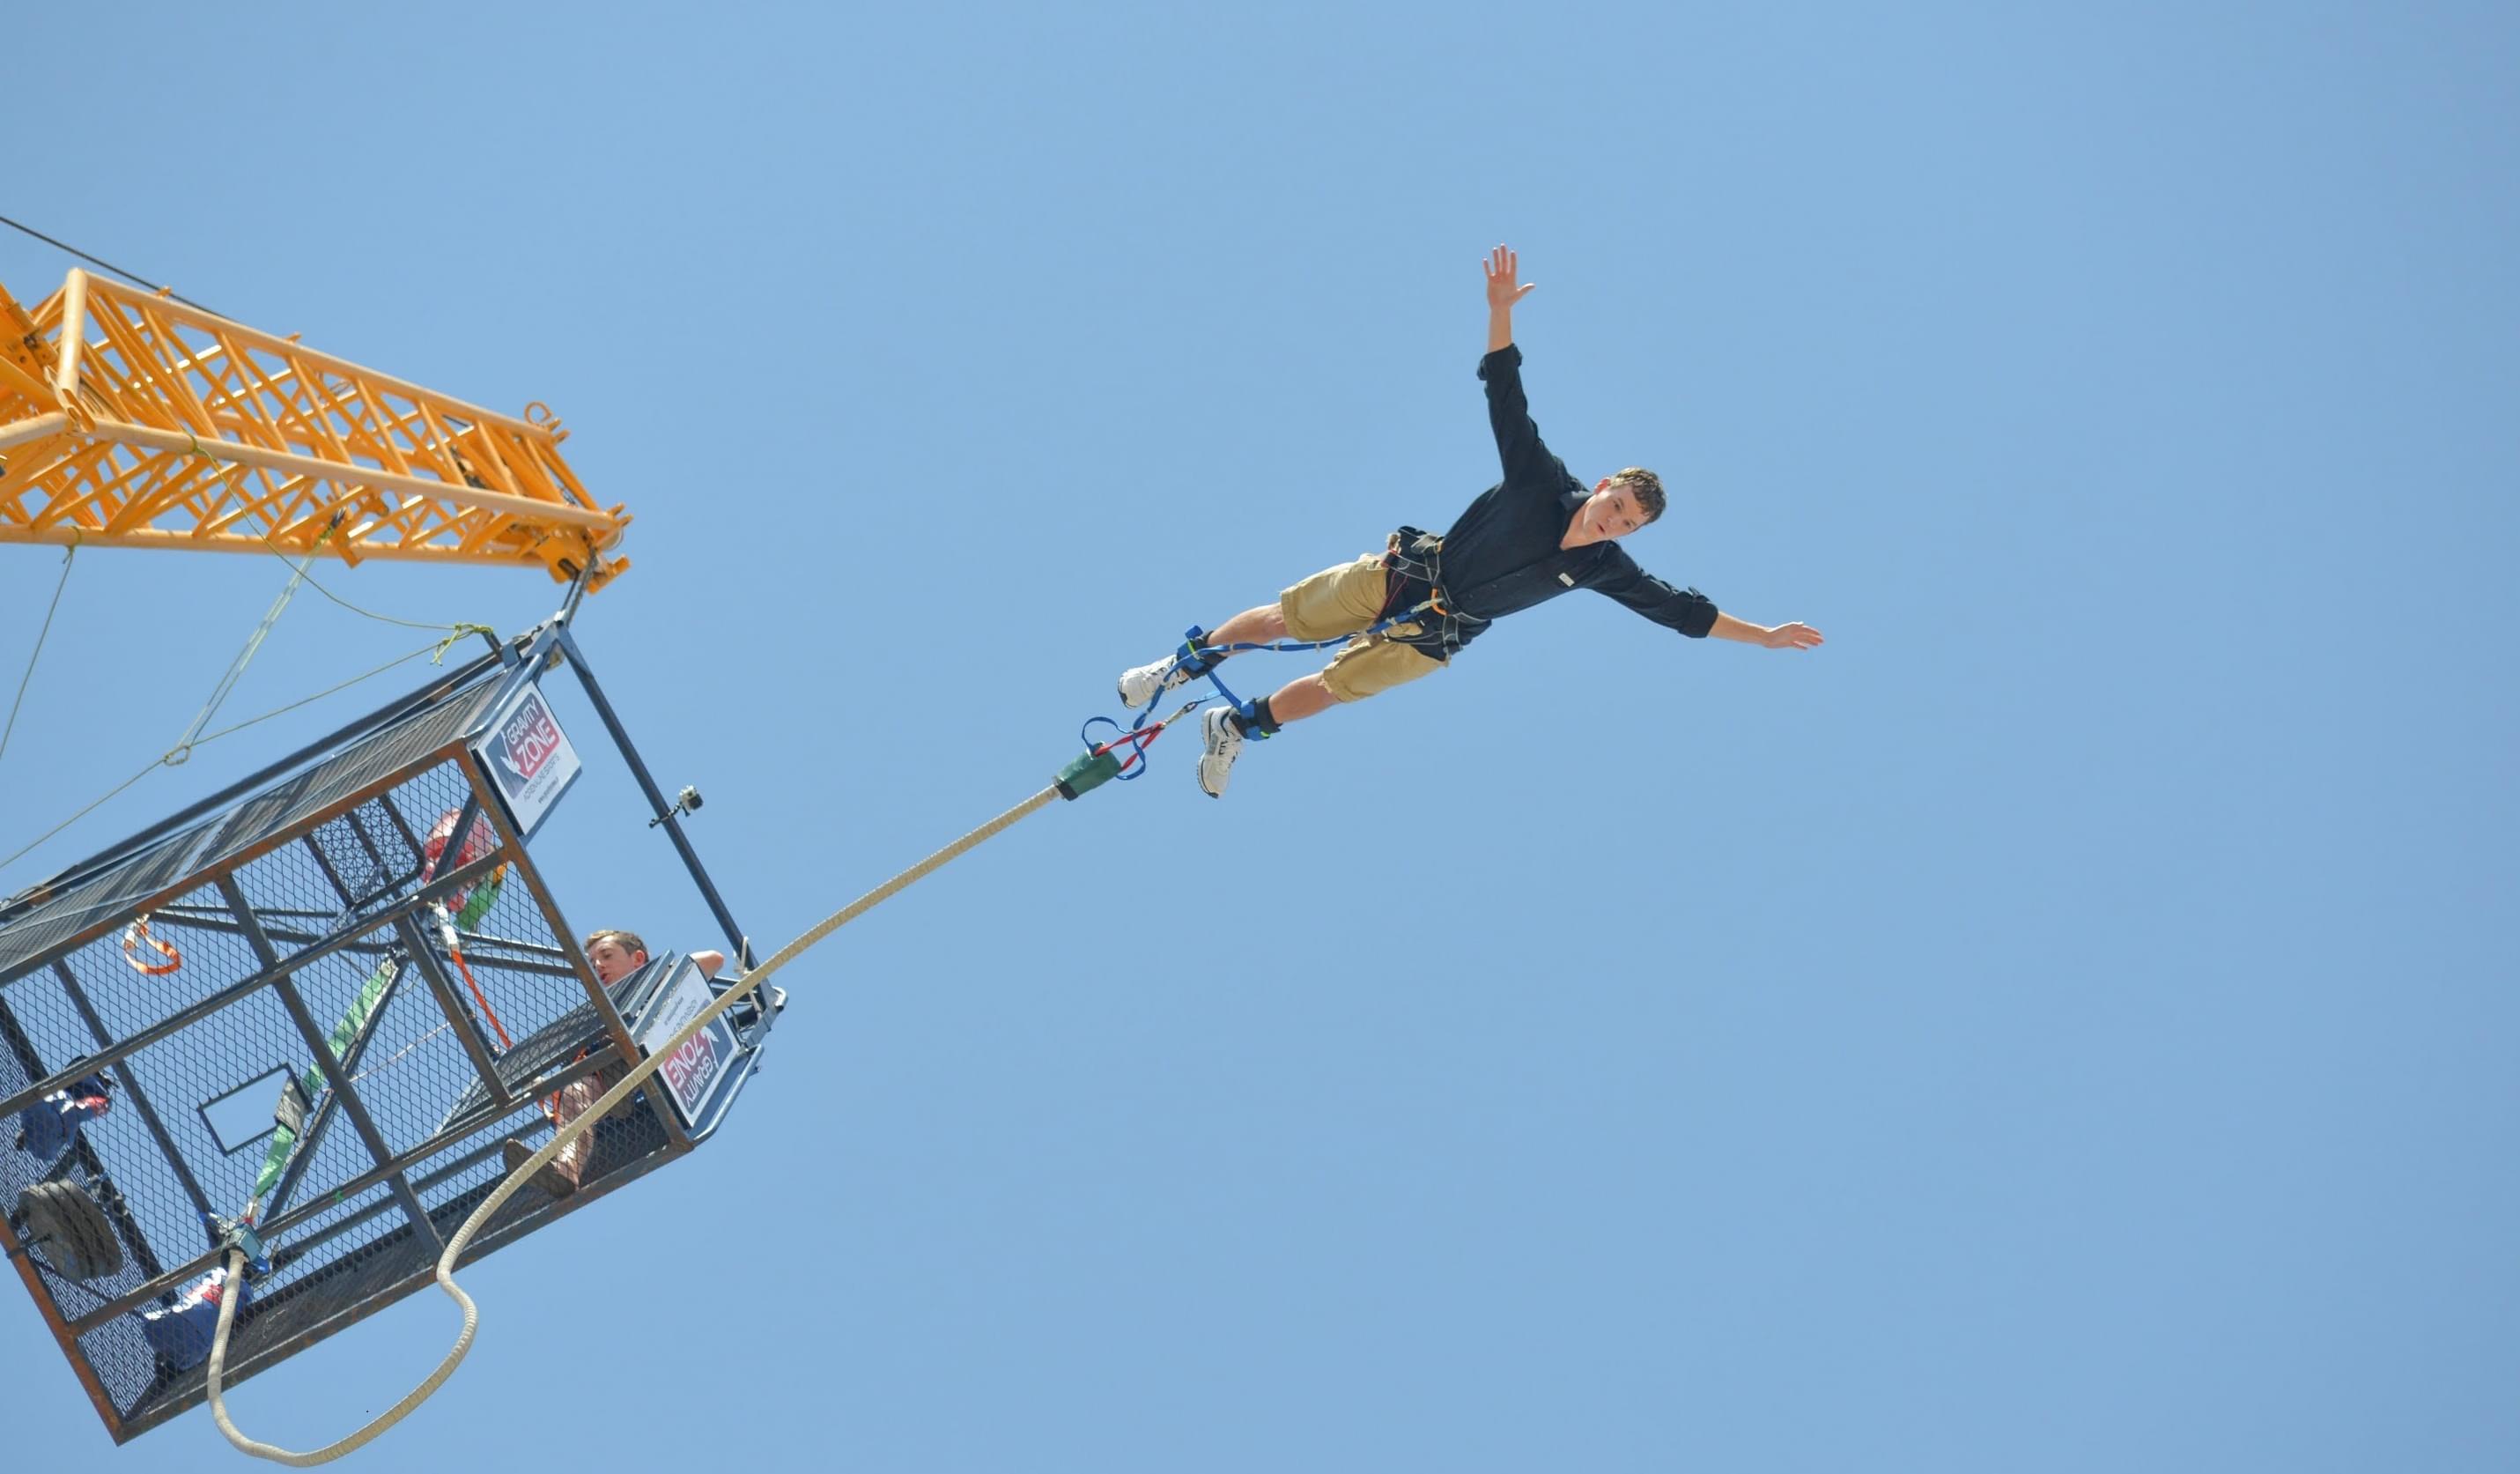 Bungee Jumping Dubai | Enquire Now To Avail The Best Deals